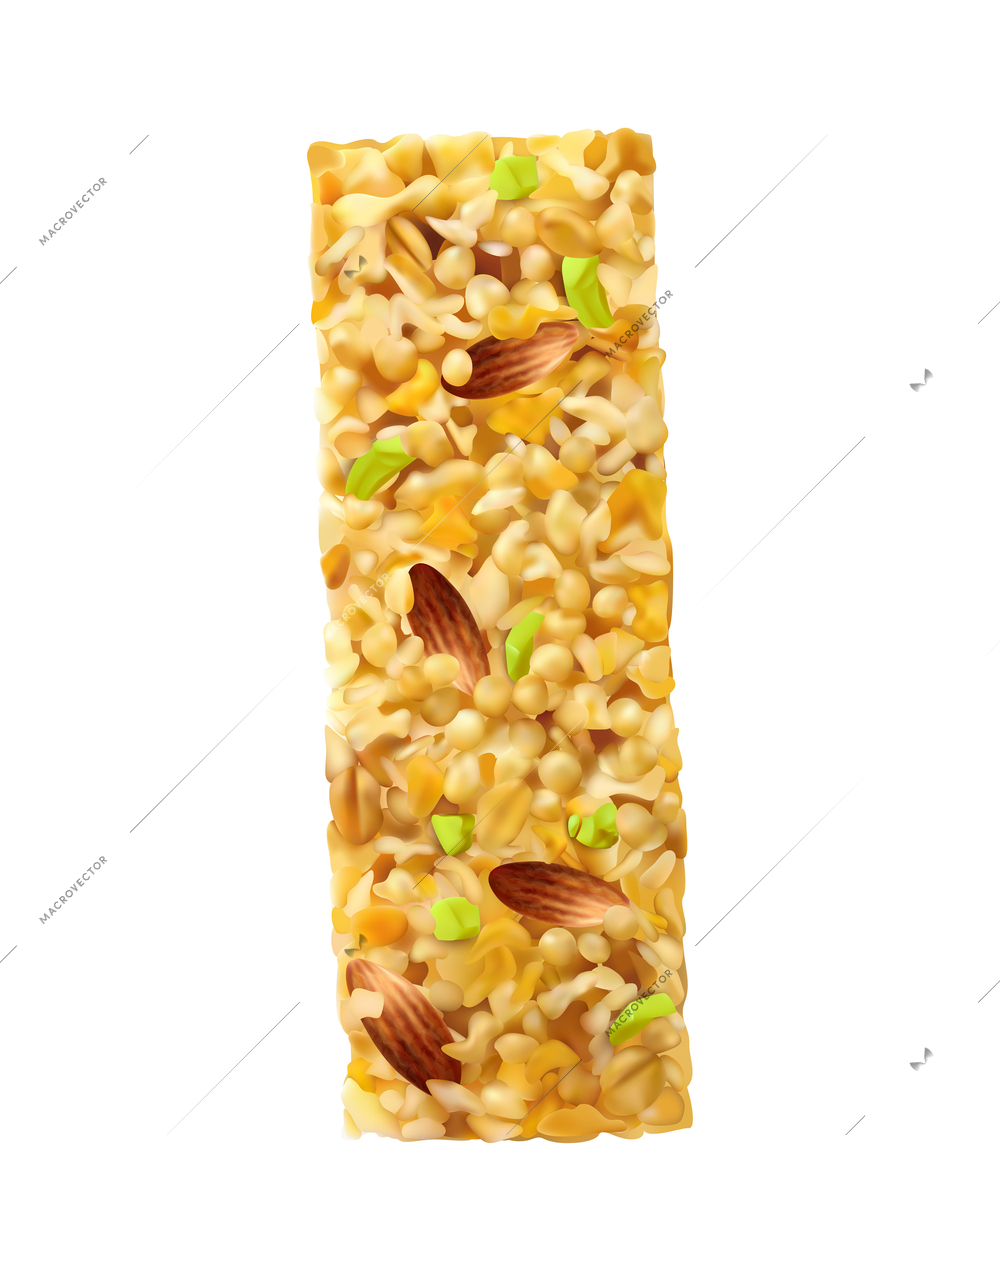 Realistic unwrapped superfood muesli bar with almond on white background vector illustration